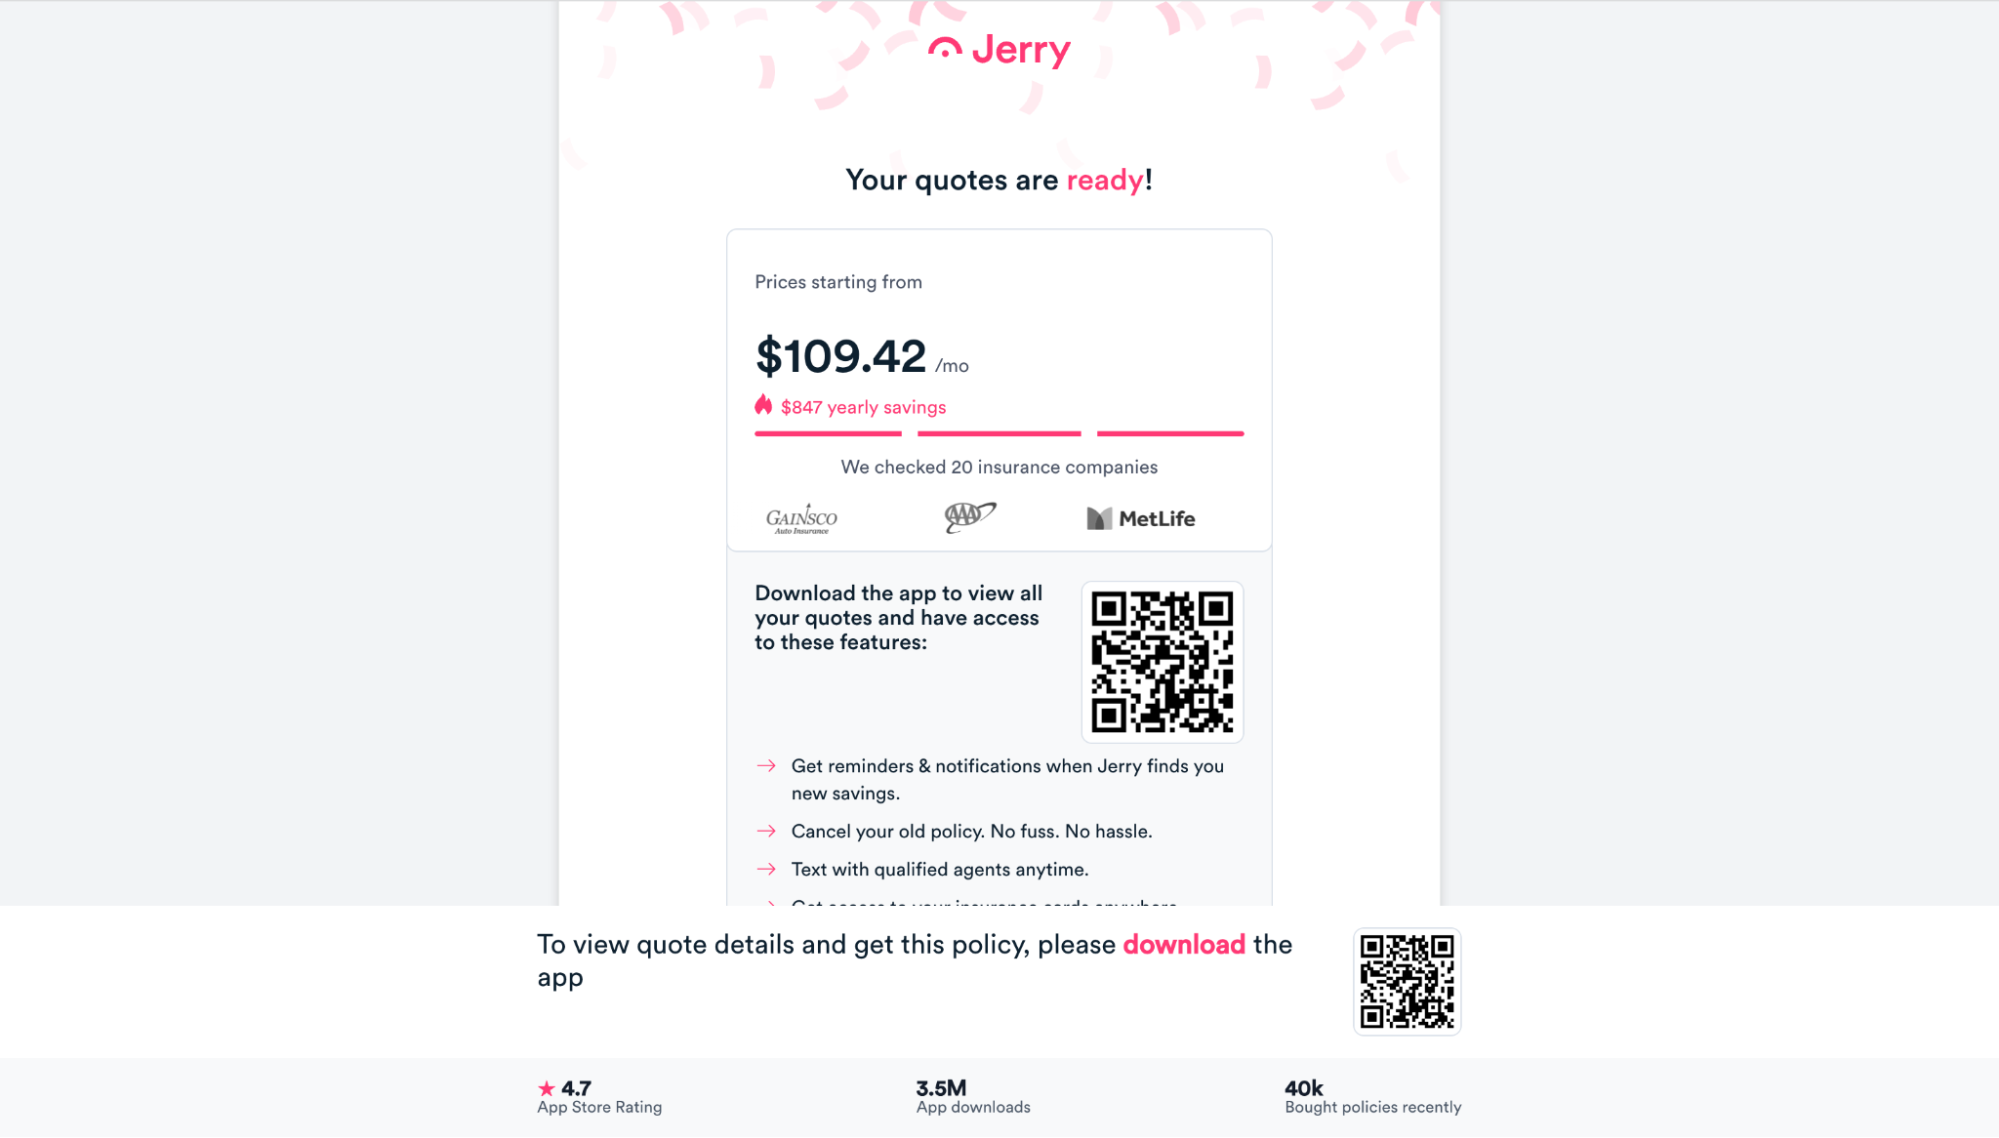 Jerry insurance quote page asking to download the app